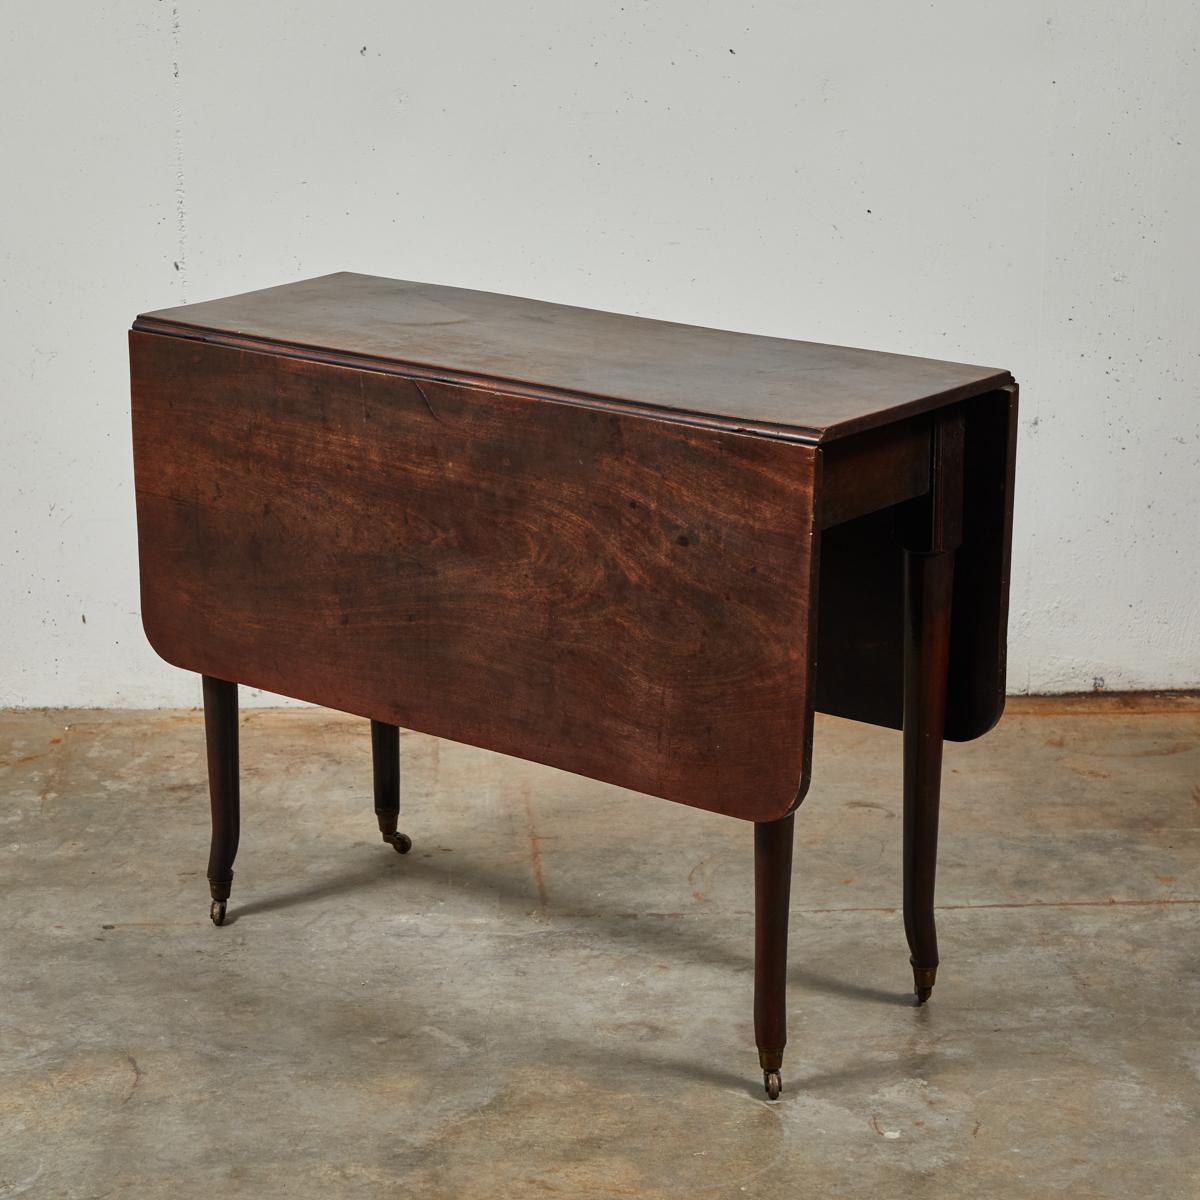 British Colonial 18th Century Plum Pudding Mahogany Drop-Leaf Dining or Side Table from England